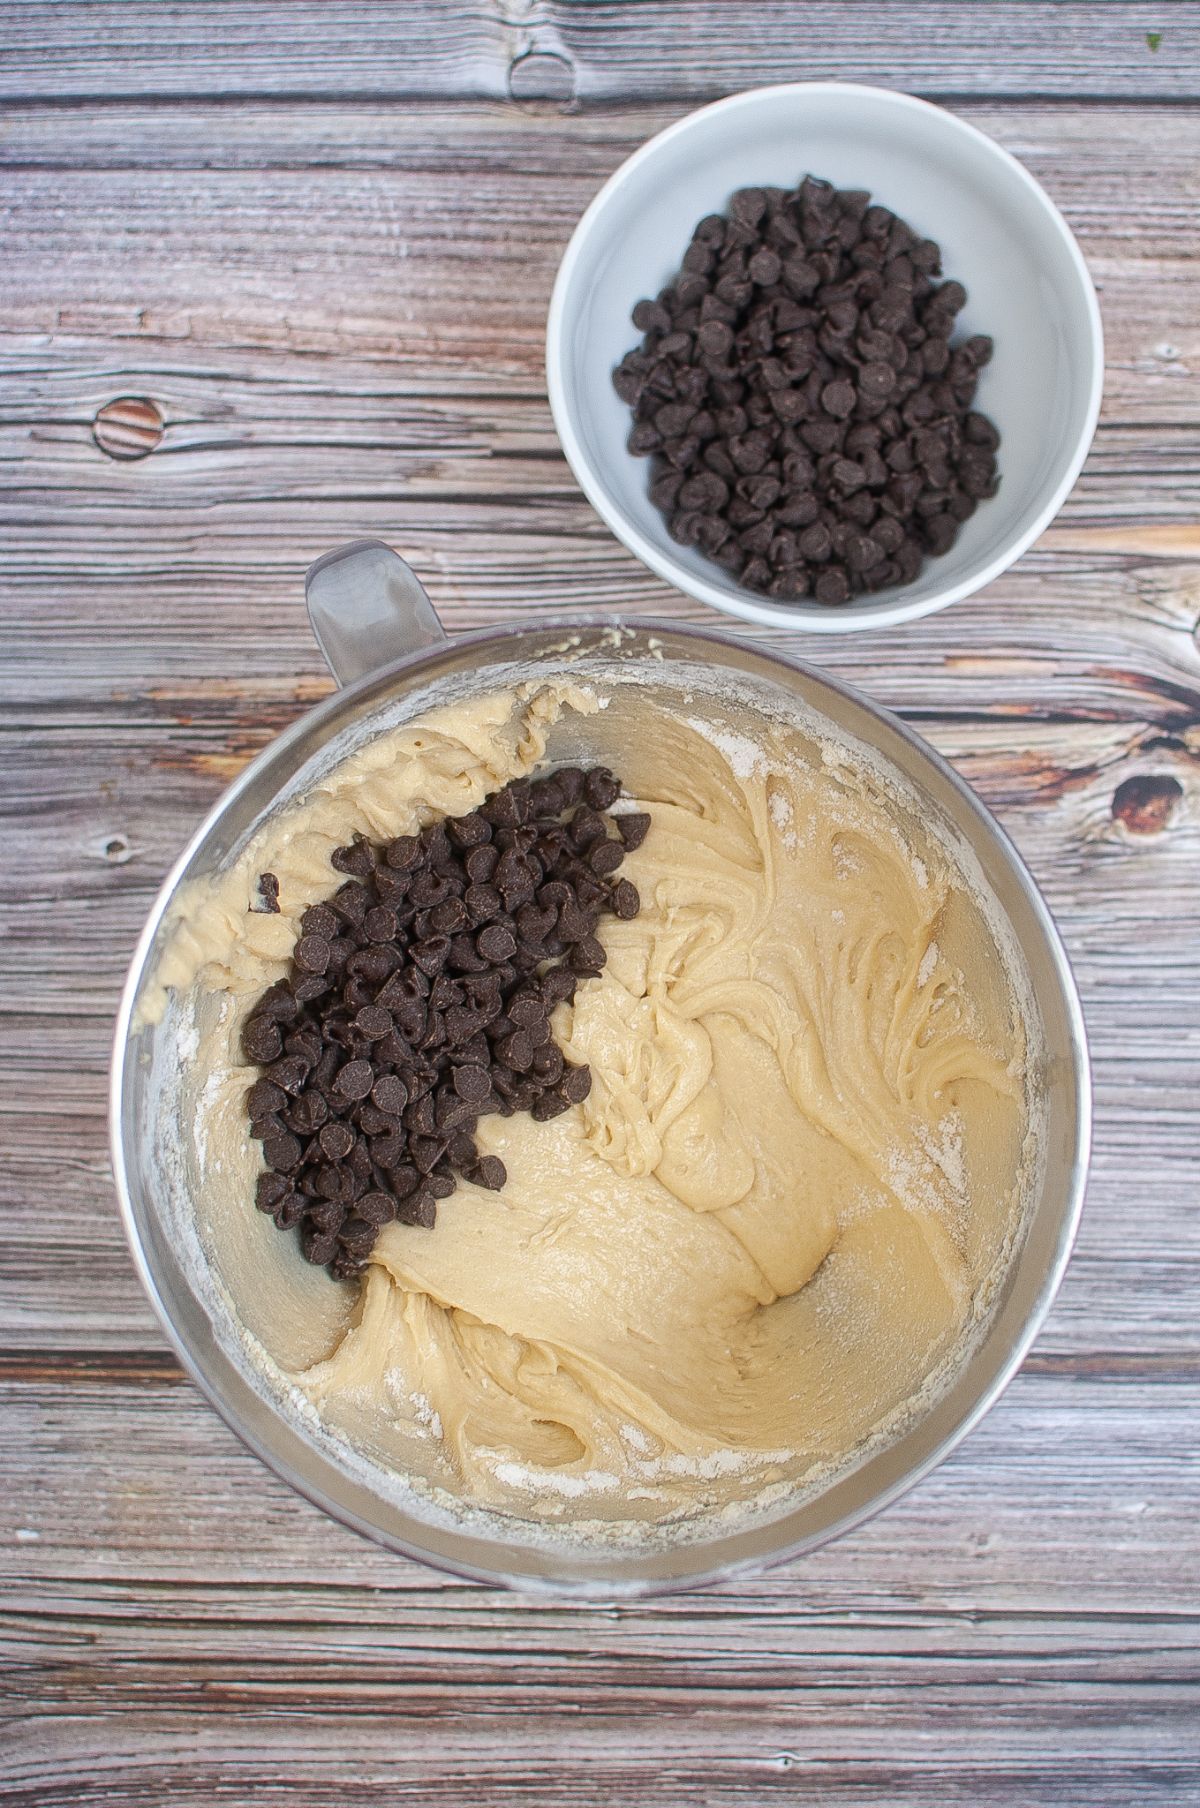 chocolate chips added to the muffin batter in a mixing bowl next to more chocolate chips in a white bowl